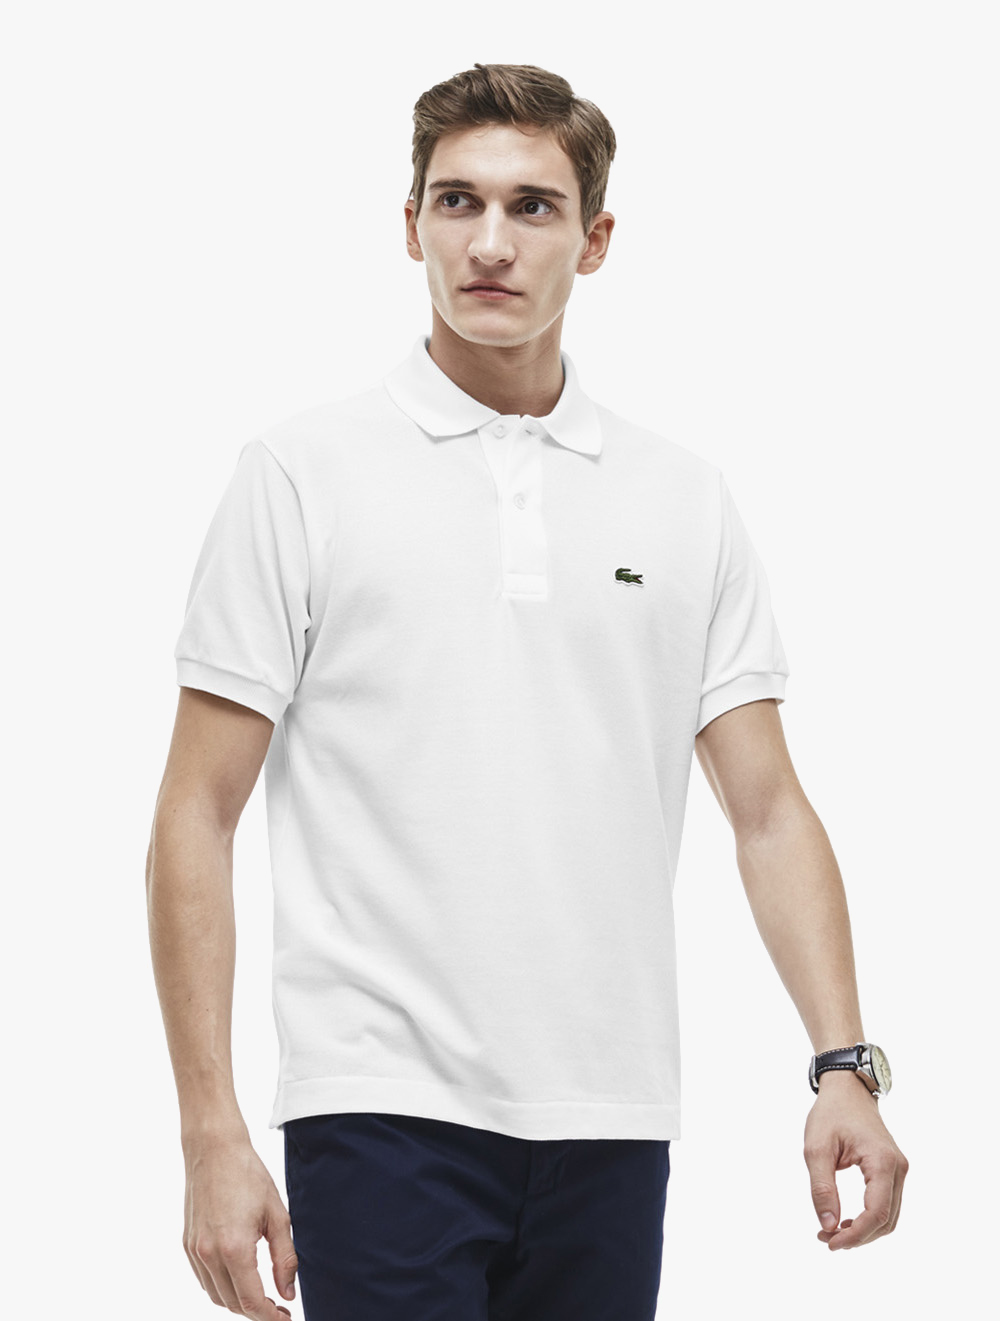 Polos From Lacoste in Indonesia 